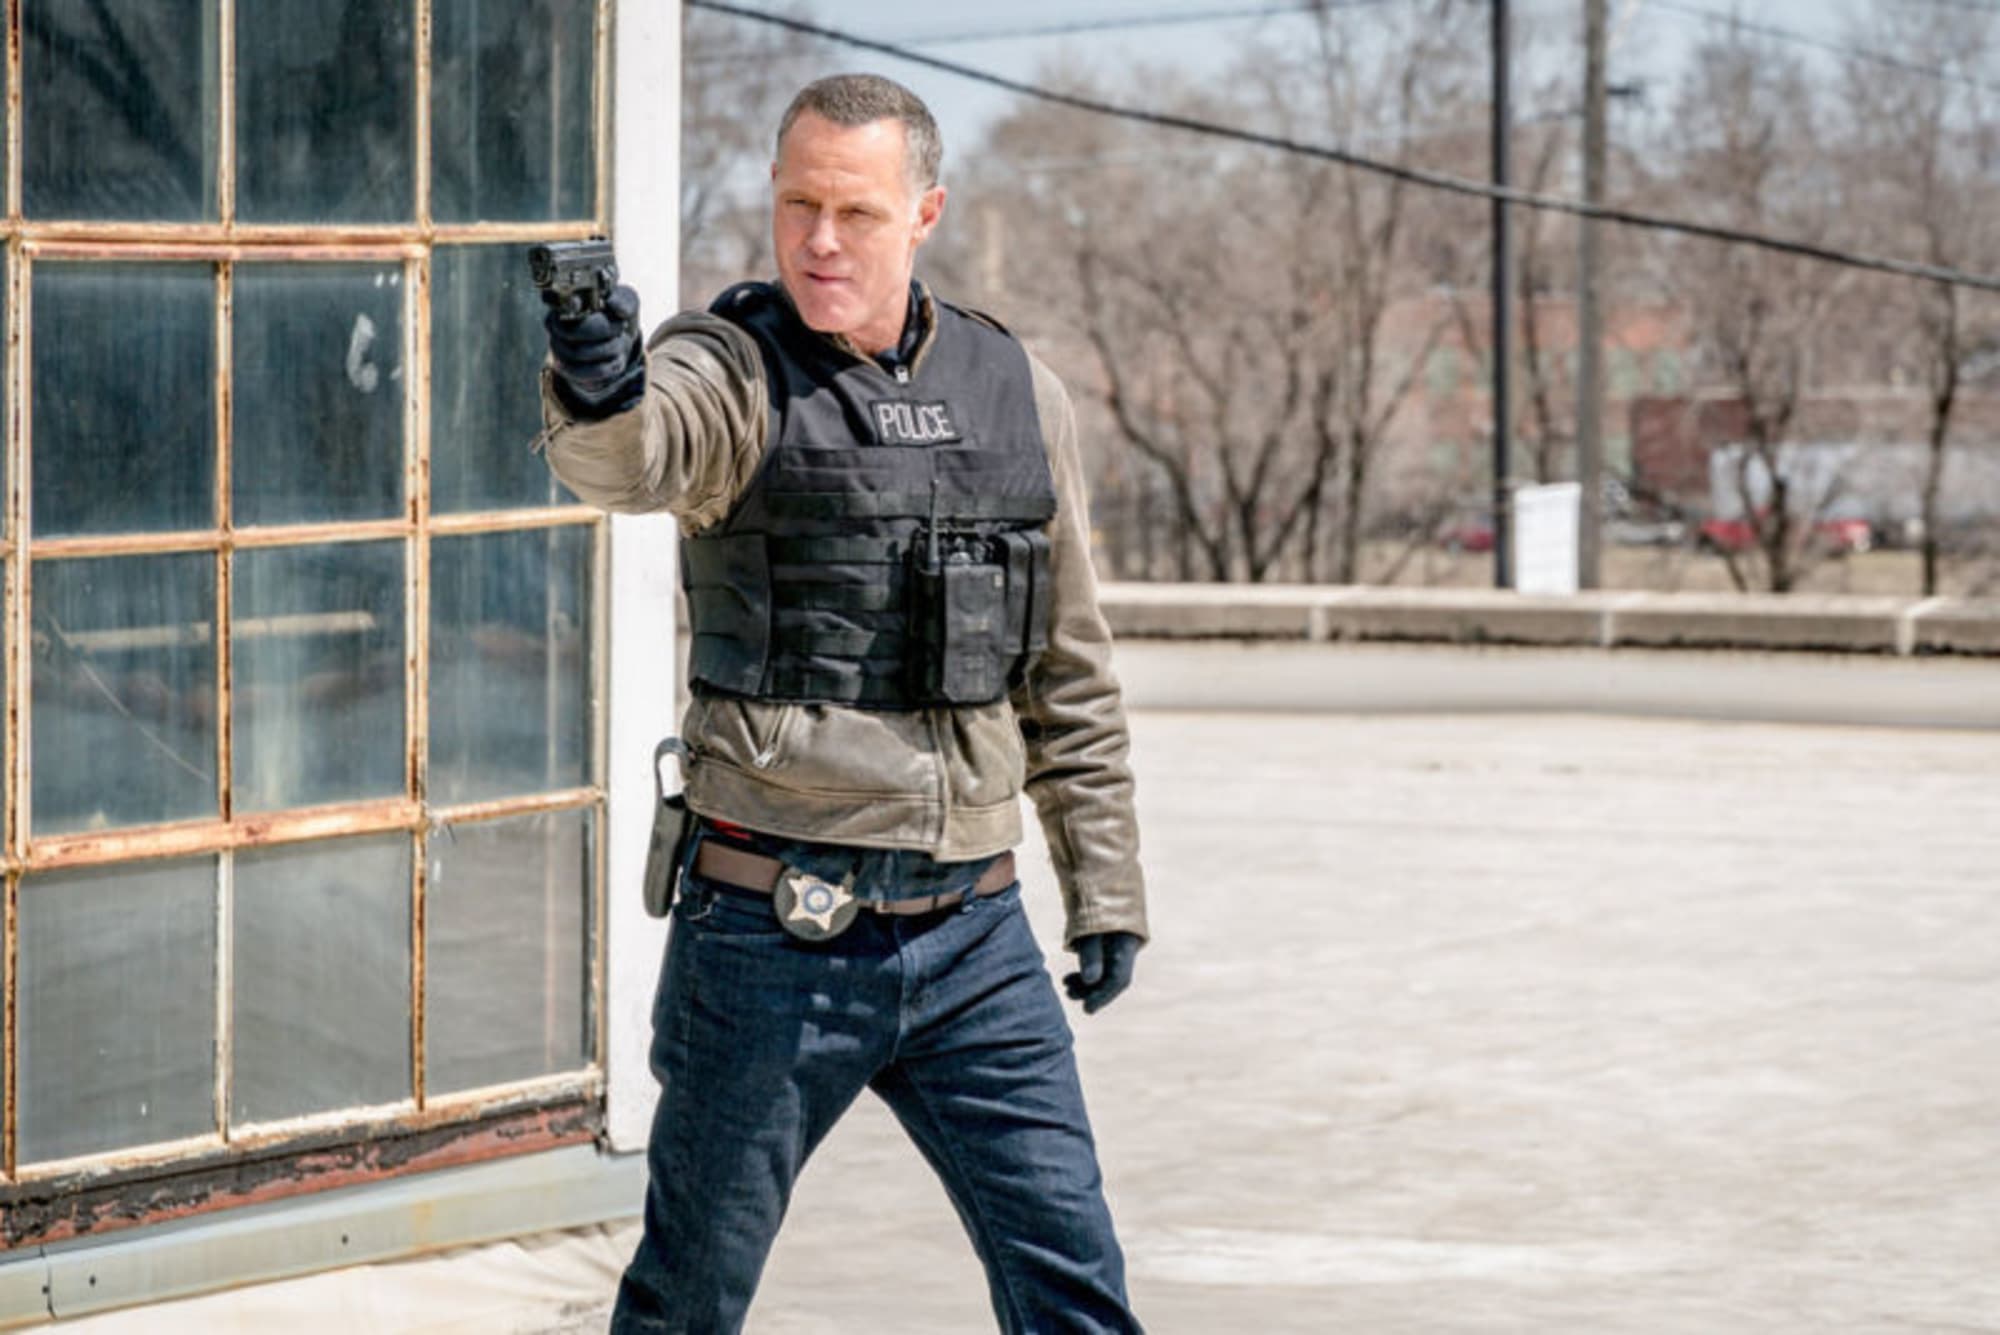 Chicago PD season finale synopsis and promo